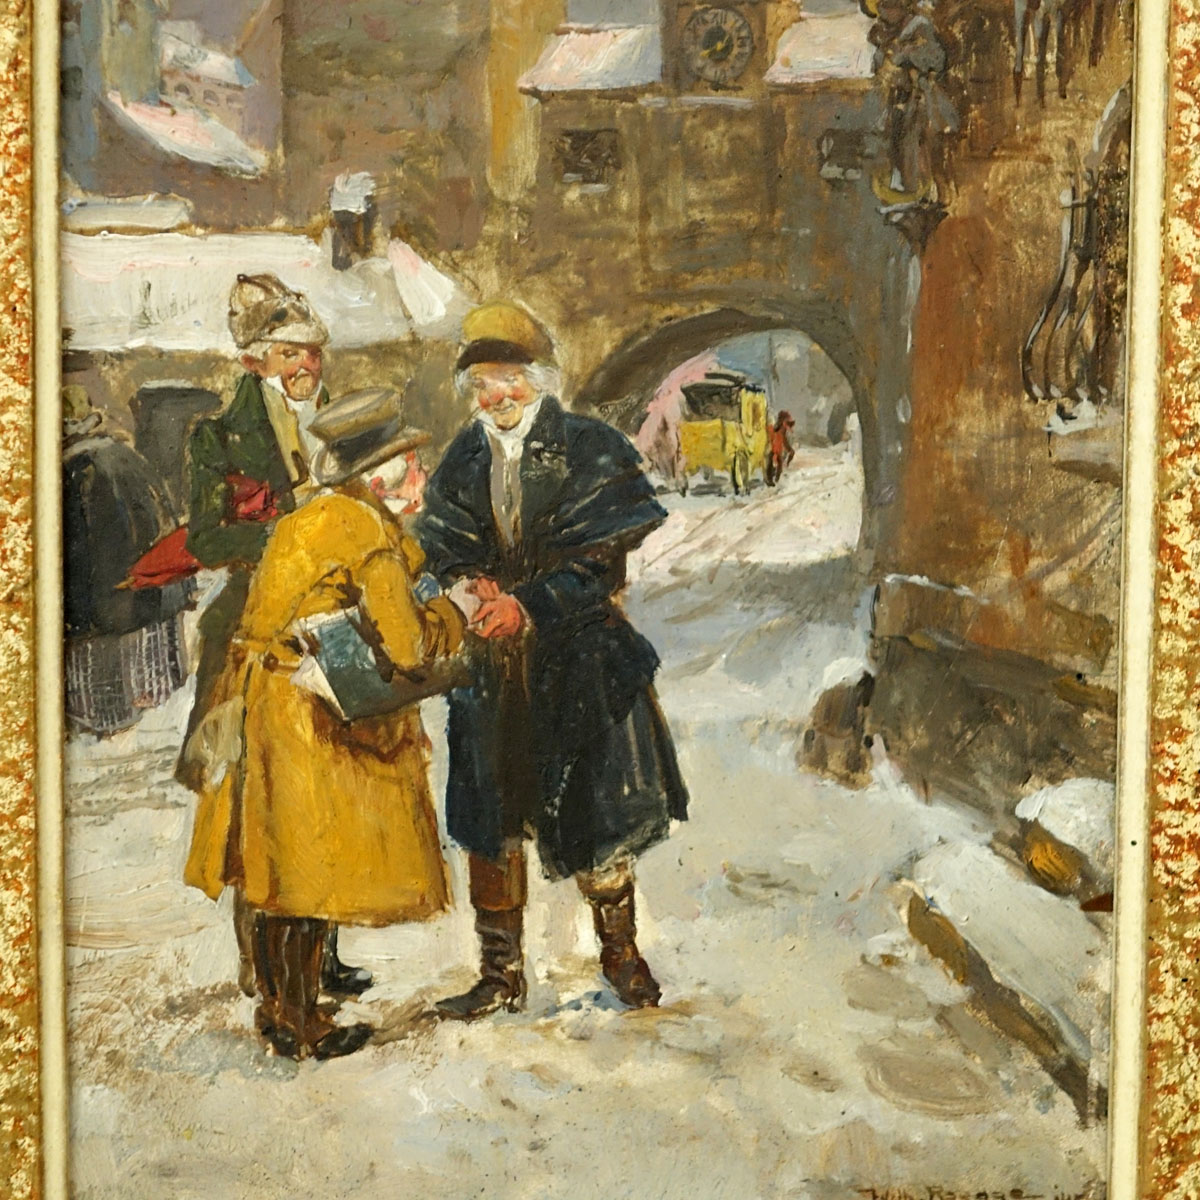 Wilhelm Roegge I, German  (1829 - 1908) Oil on Board, Street Scene with Figures, Signed Lower Right. Tag with artist name and date attached to frame.